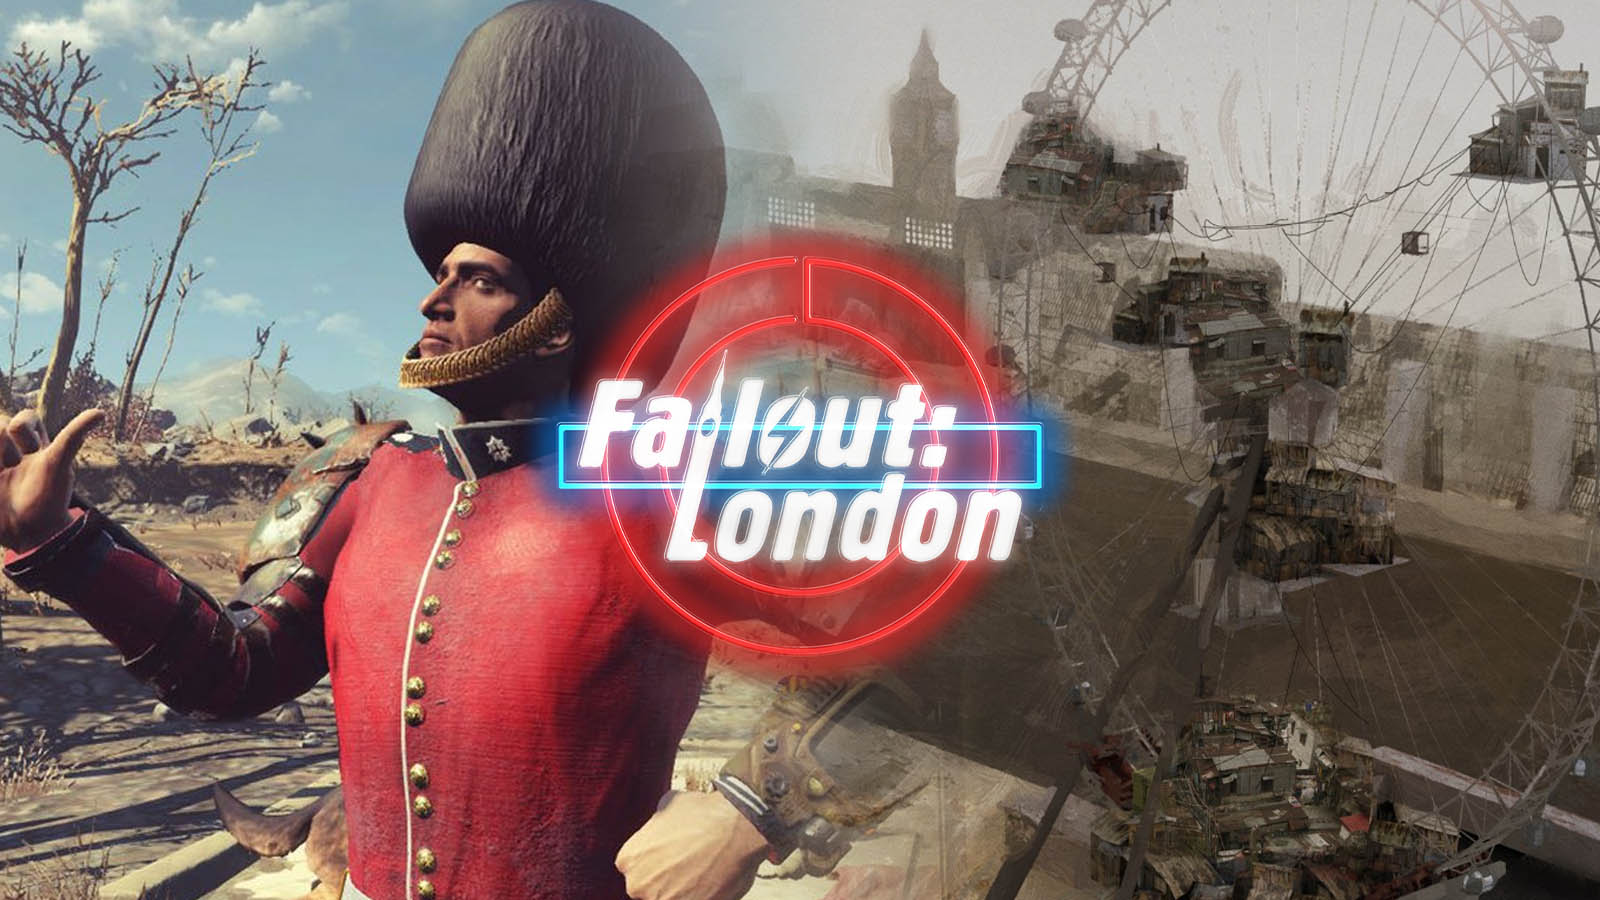 Fallout: London Gameplay Trailer Is A Bold Reinvention Of The Franchise - GGRecon